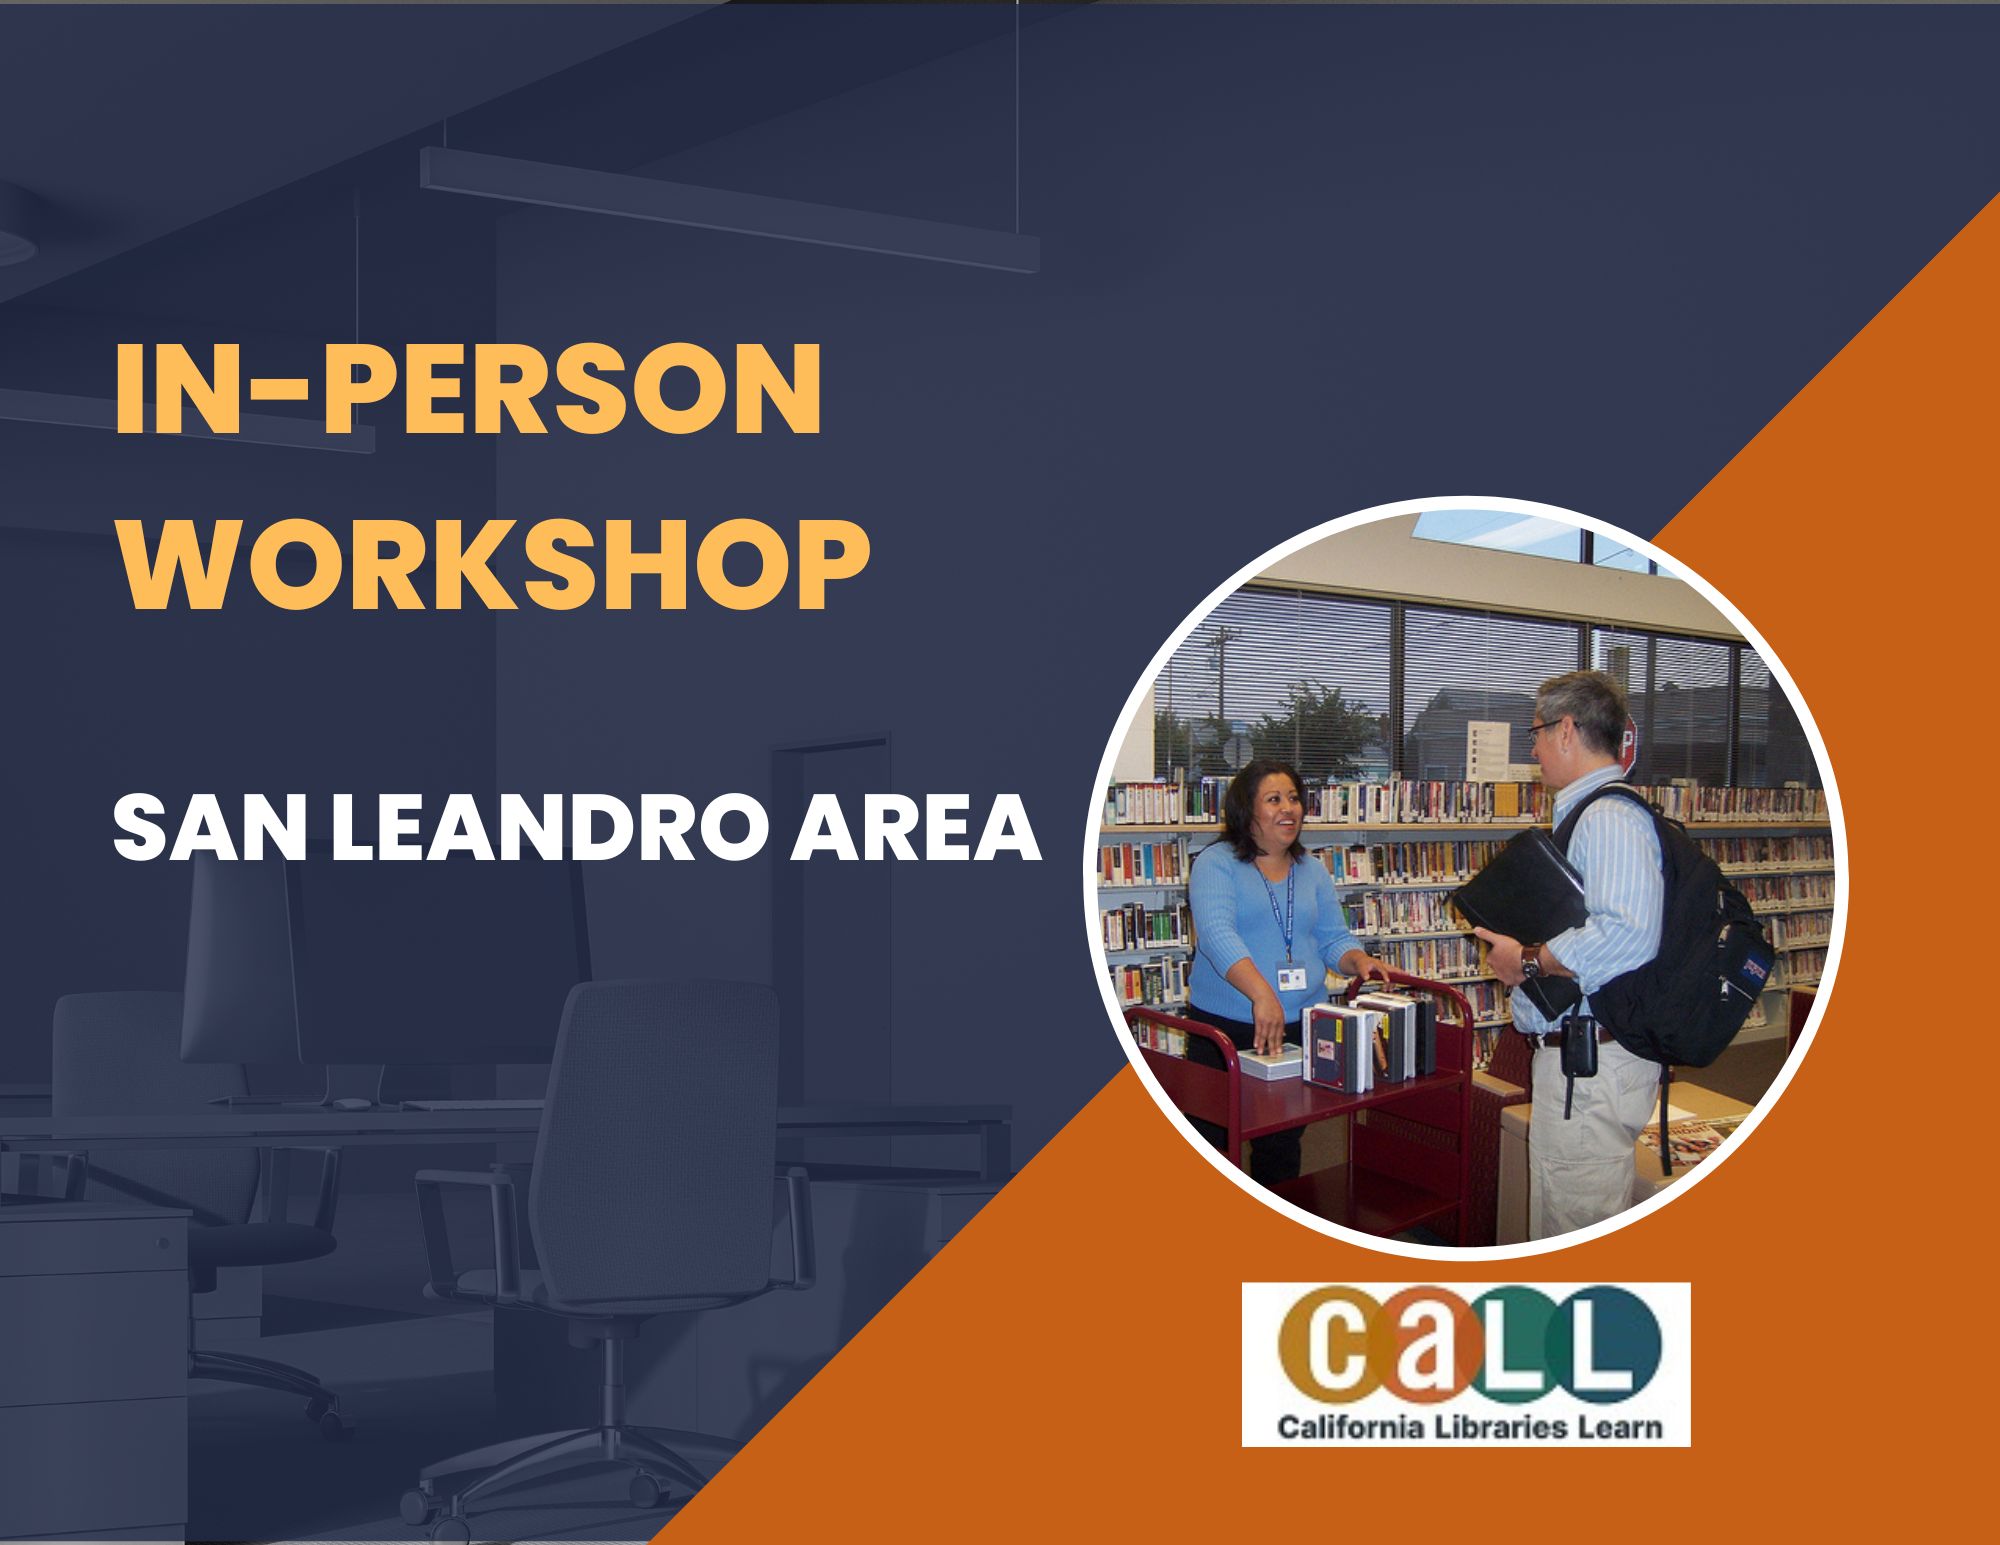 Managing Patron Challenges Through a Trauma-Informed Lens: Skill-Building Sessions, In-person workshop in the San Leandro Area